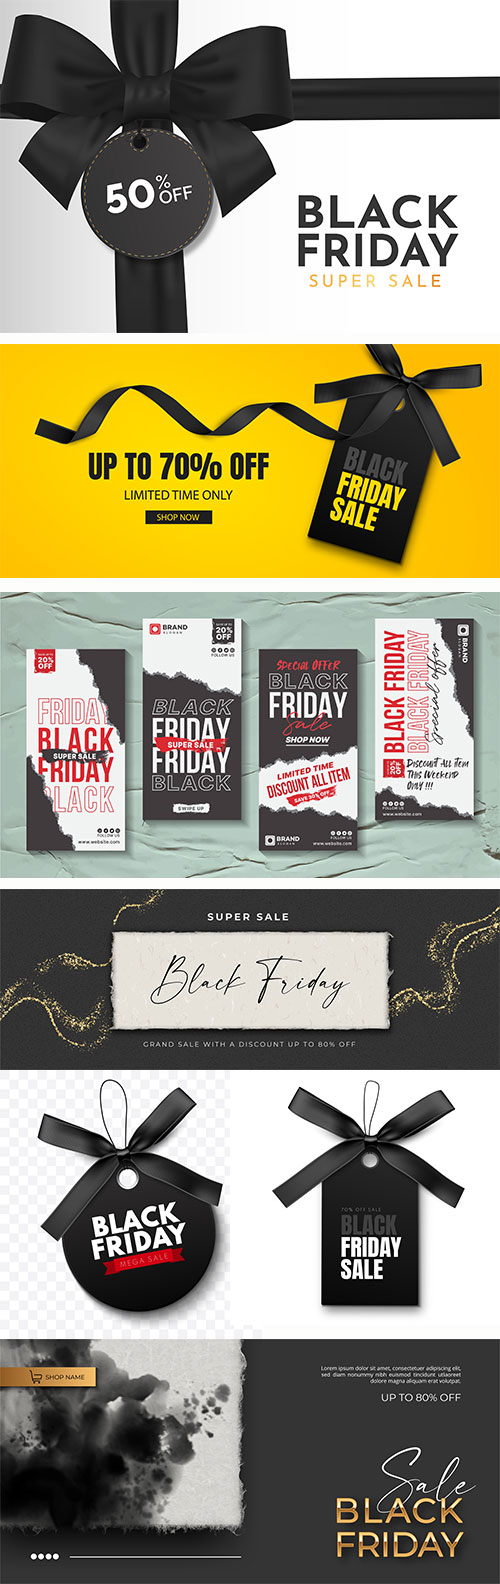 Black friday sale banner with vector realistic 3d objects